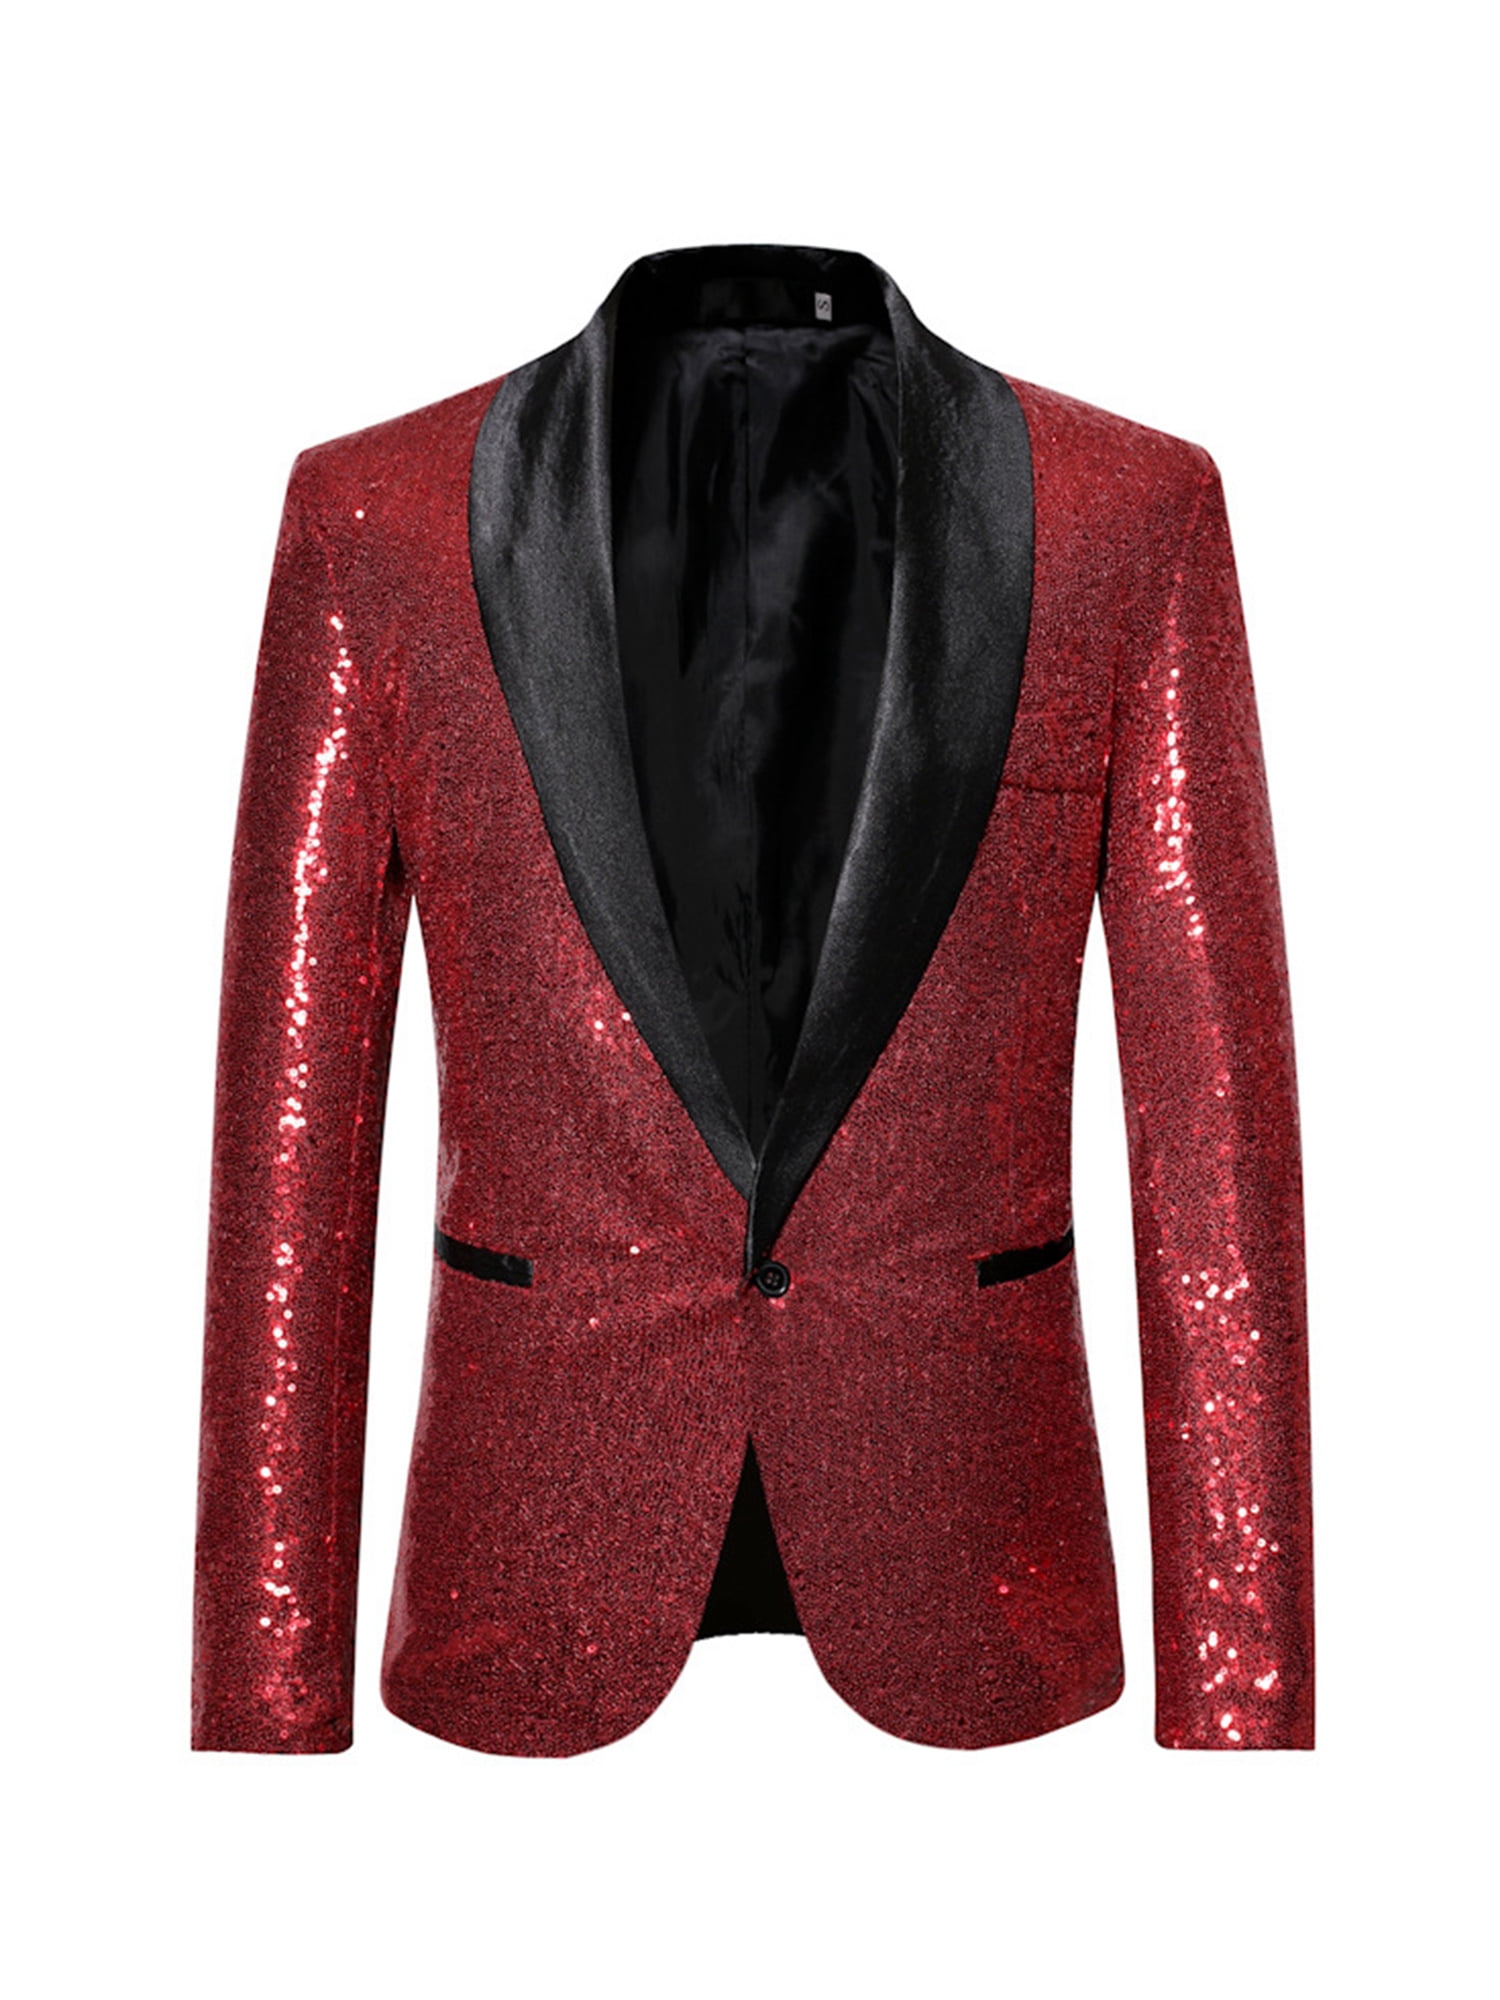 WNSY Men Sequin Notched Lapel One Button Clubs Blazer Jacket